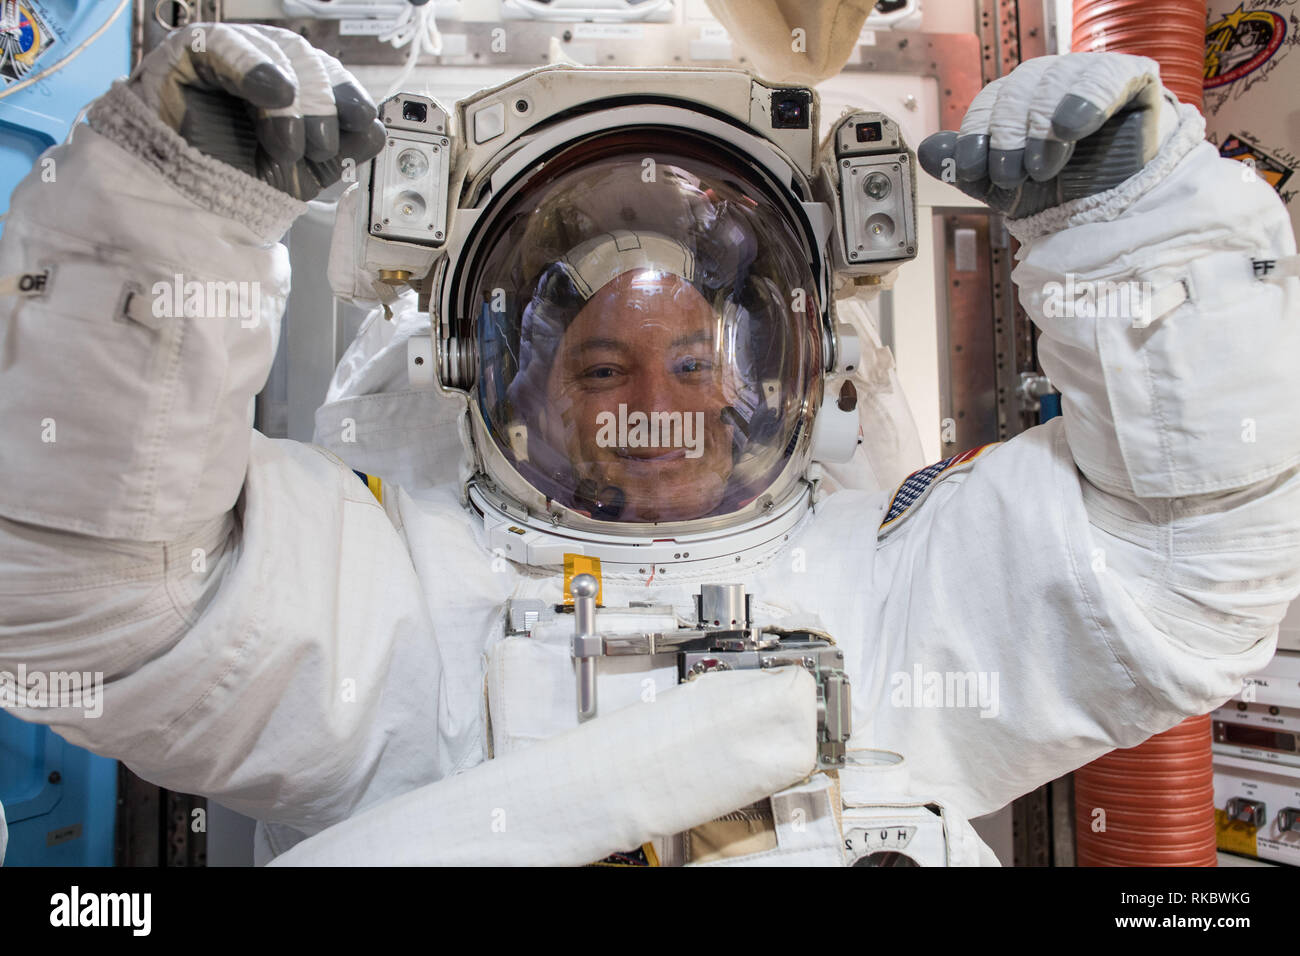 NASA astronaut Scott Tingle wearing the EMU spacesuit inside the Quest Airlock as he prepares for his first spacewalk aboard the International Space Station January 18, 2018 in Earth Orbit. McClain Stock Photo